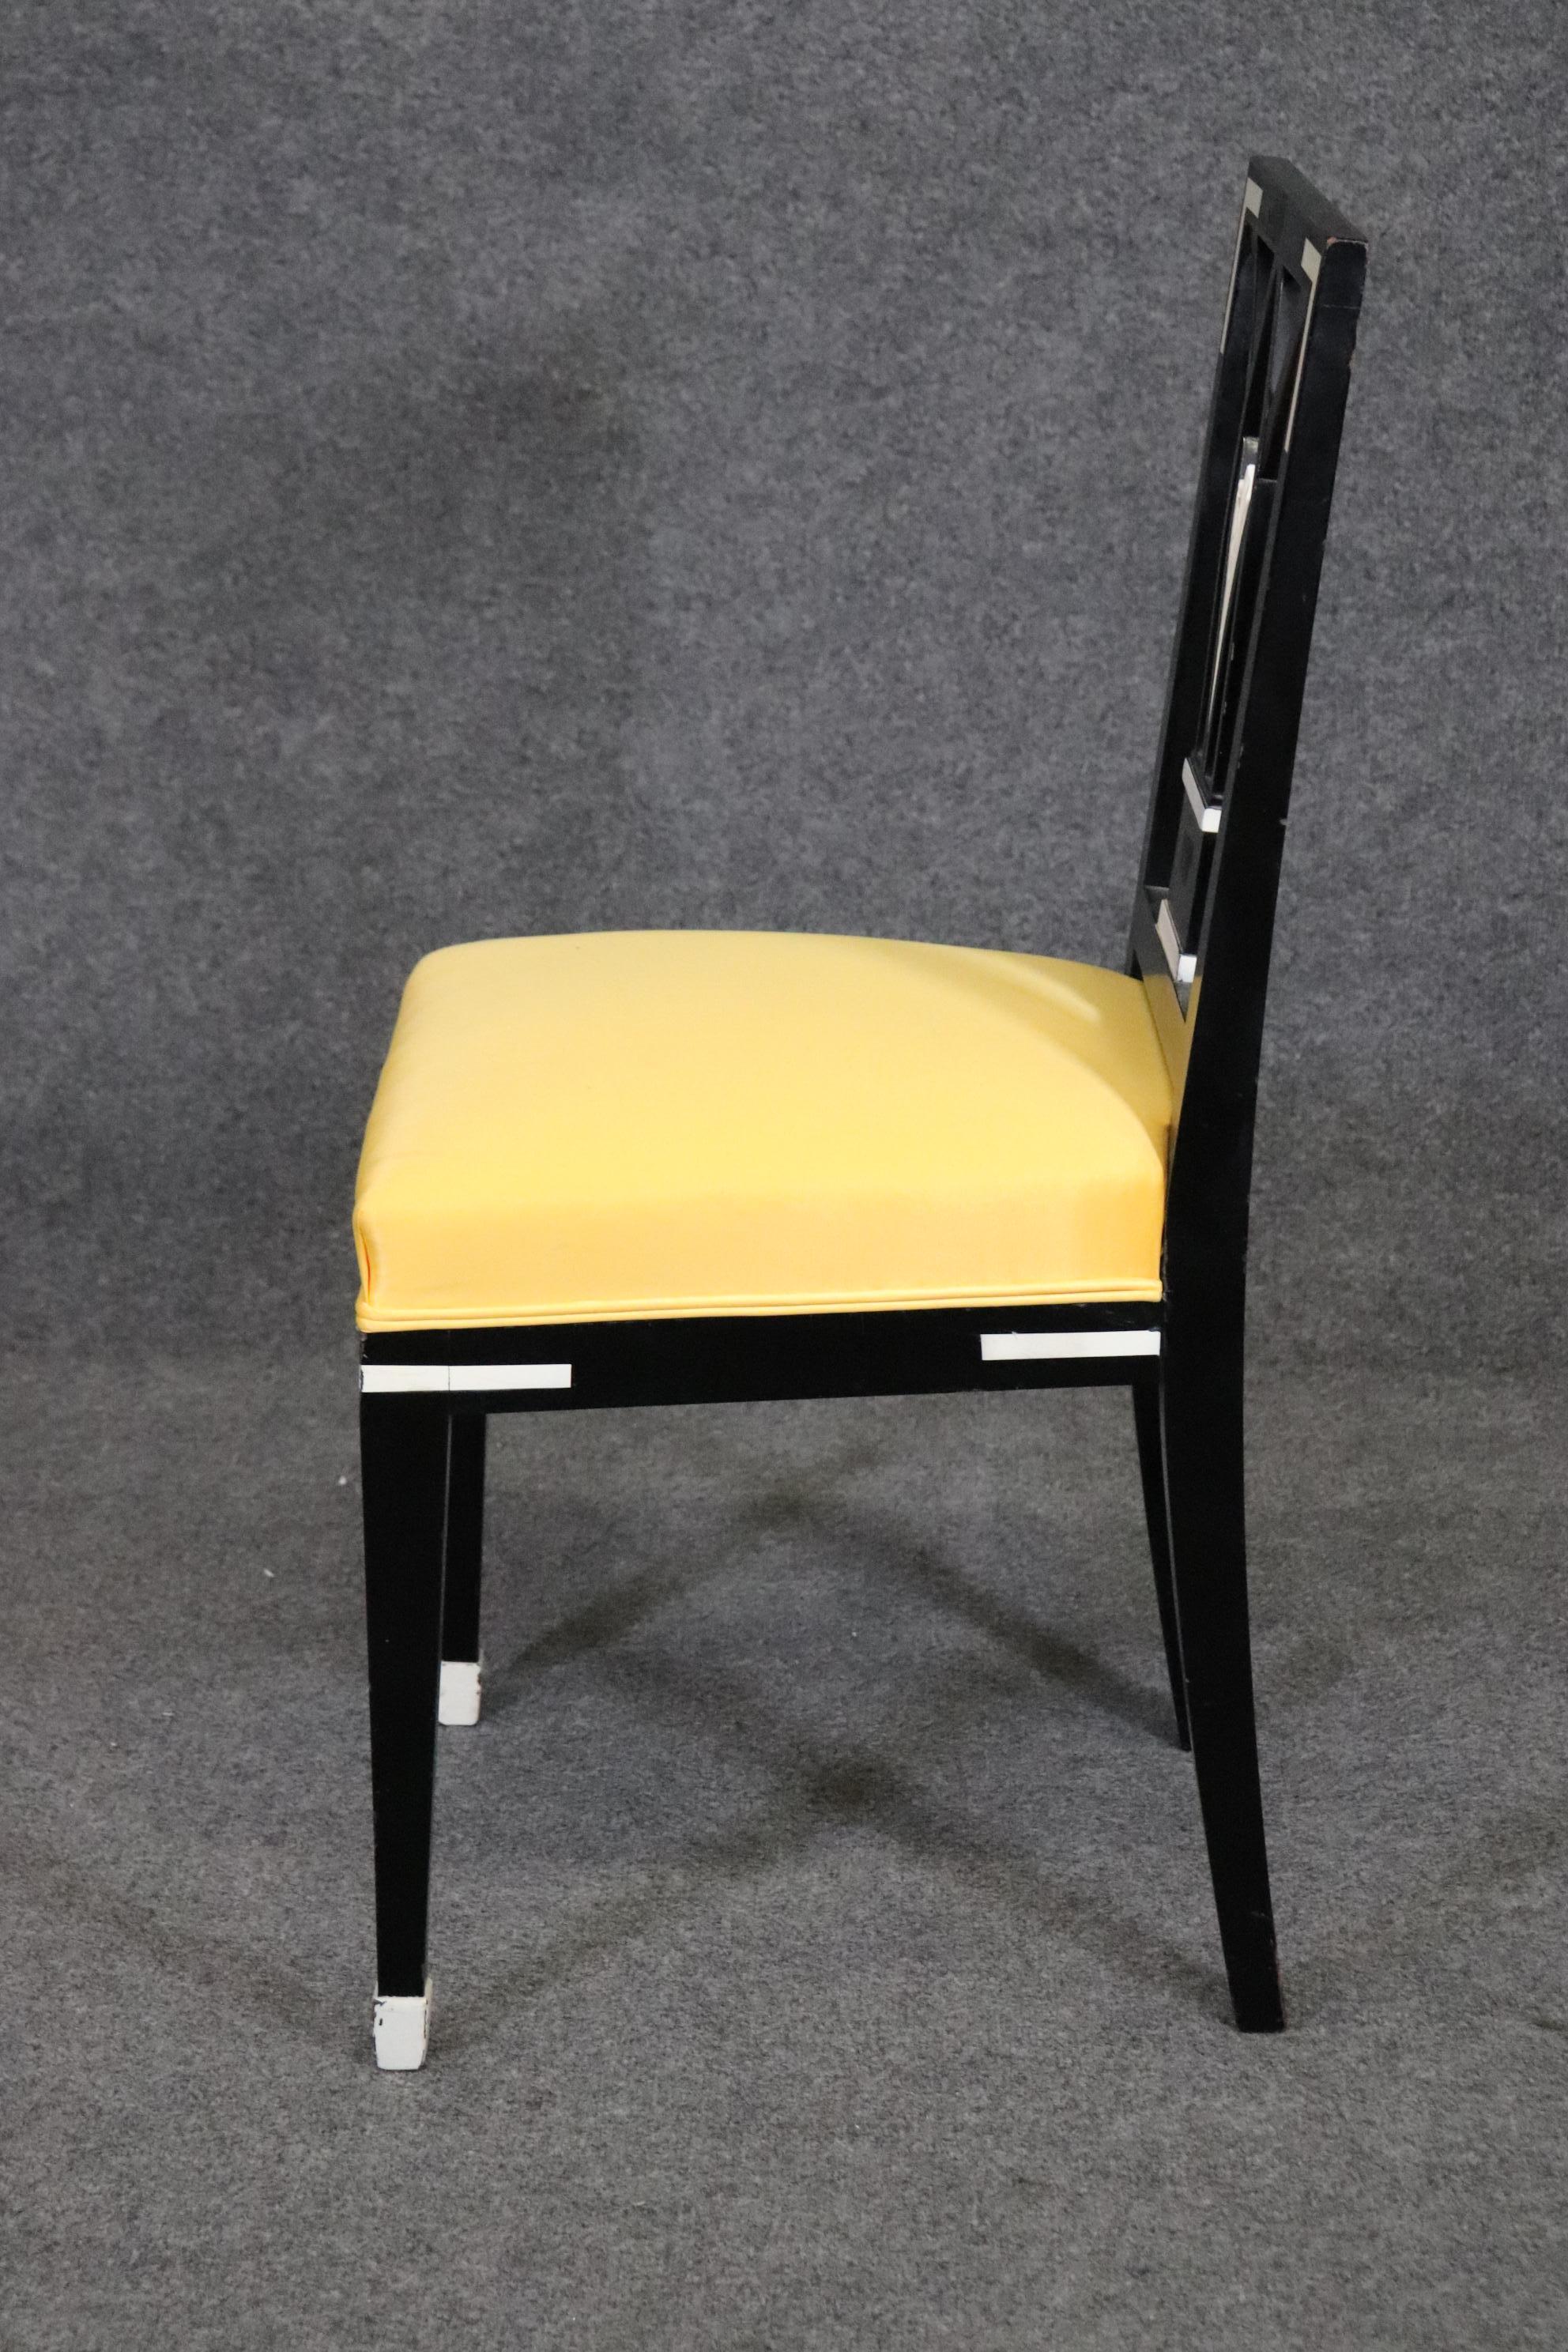 Set of 4 Ebonized French Art Deco Style Dining Chairs in Yellow Upholstery For Sale 2